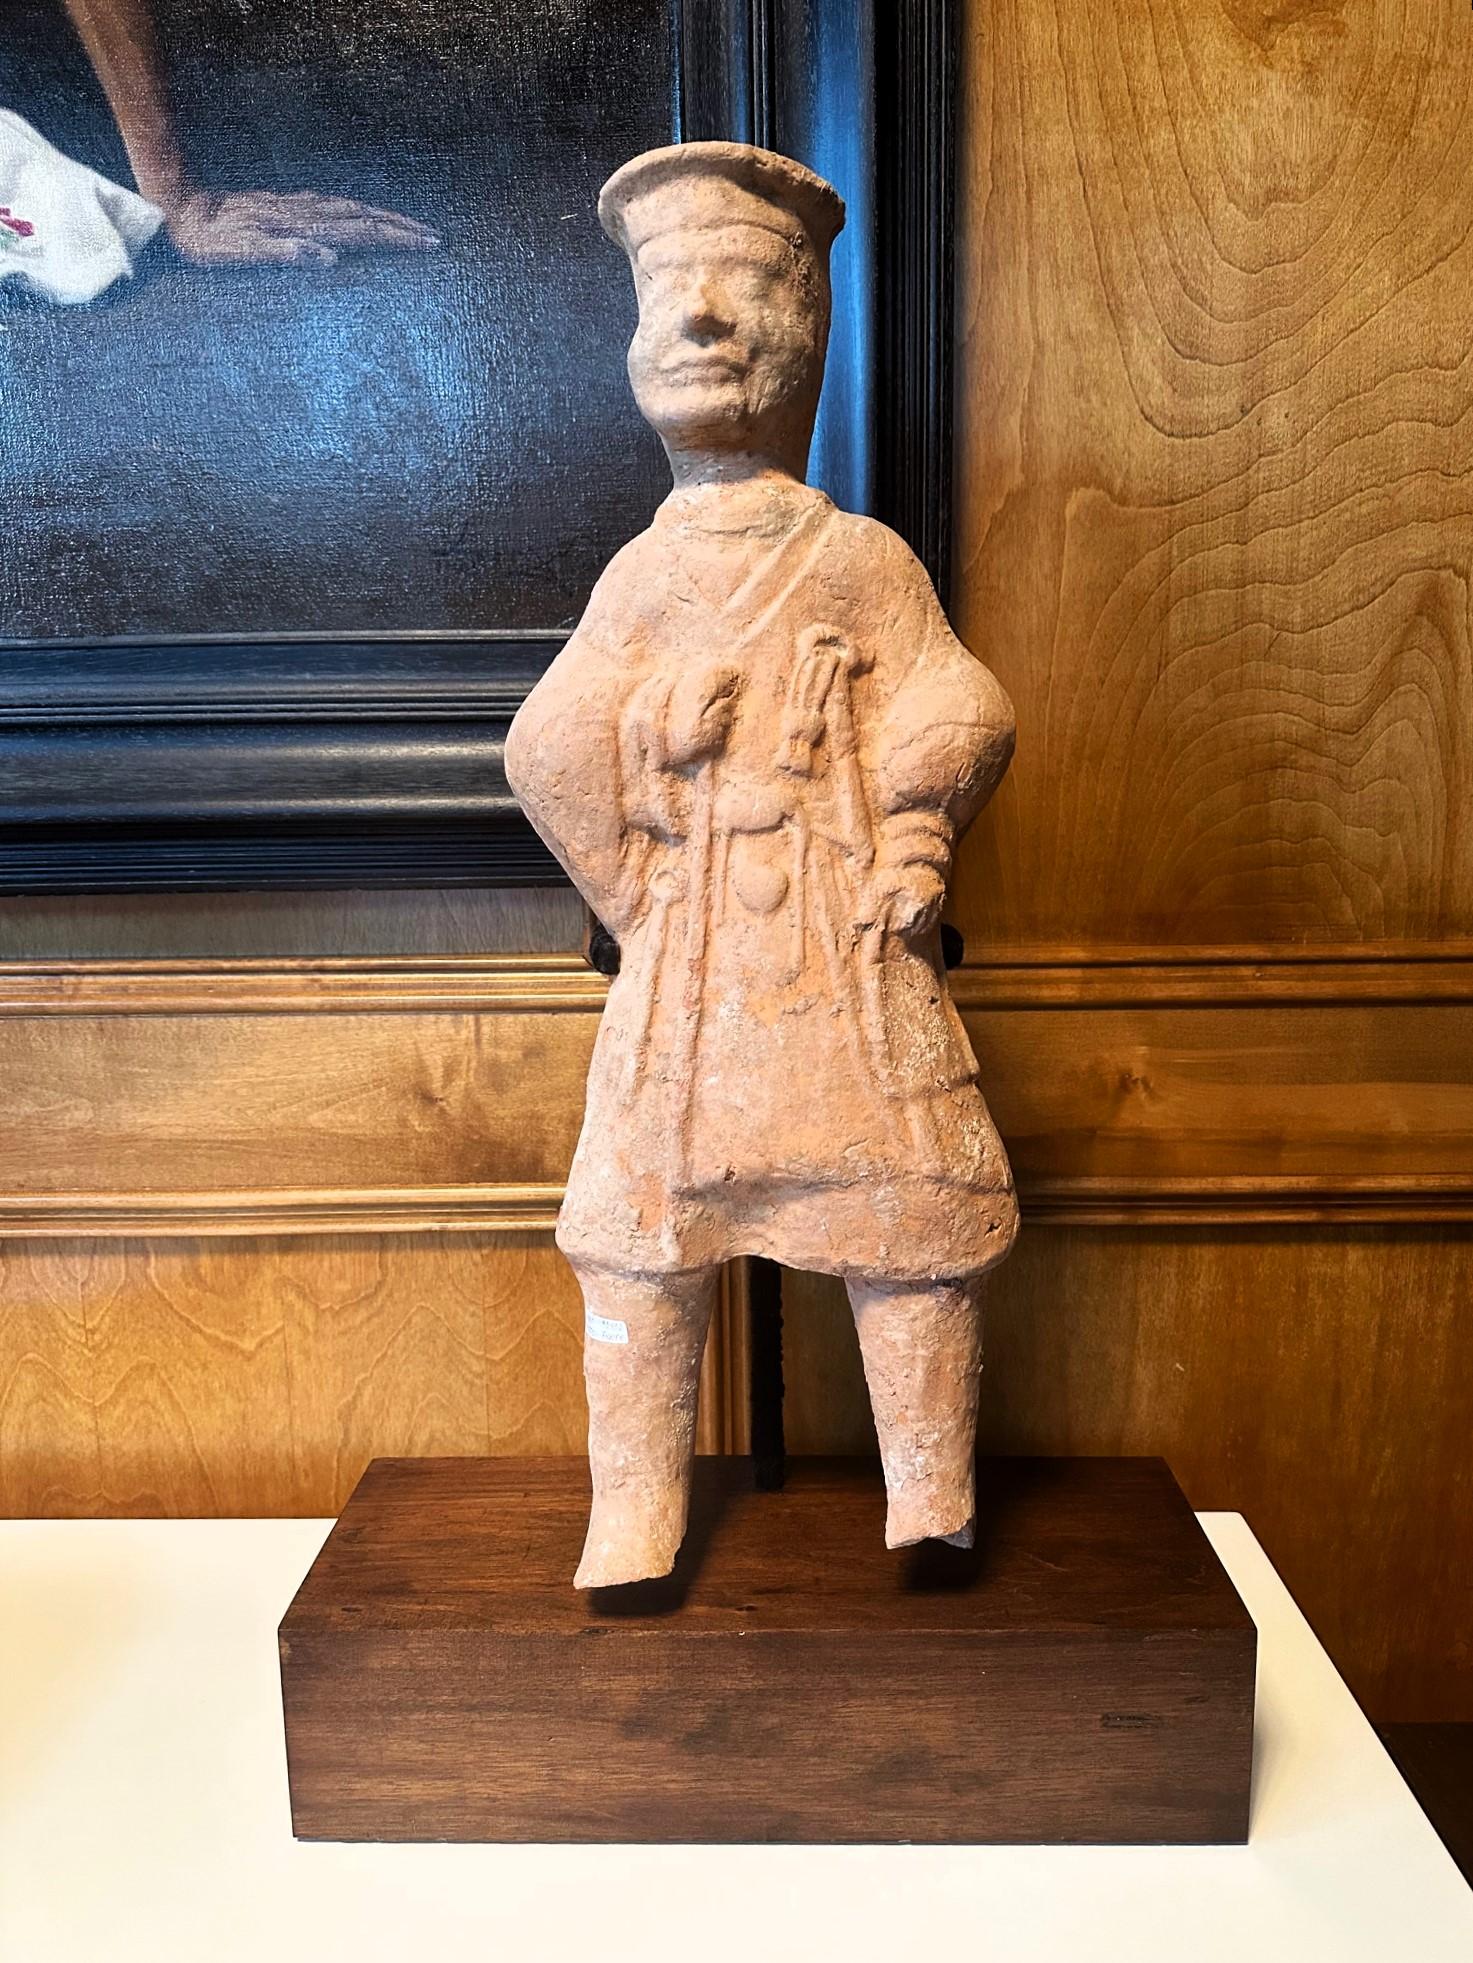 A Chinese terracotta tomb figure (Ni Yong) from East Han Dynasty (25-220 AD), likely from the area of nowadays Sichuan. It appears to depict a groom figure with attires and harness in hand. With a full attires of a flat top hat and knotted robe, the